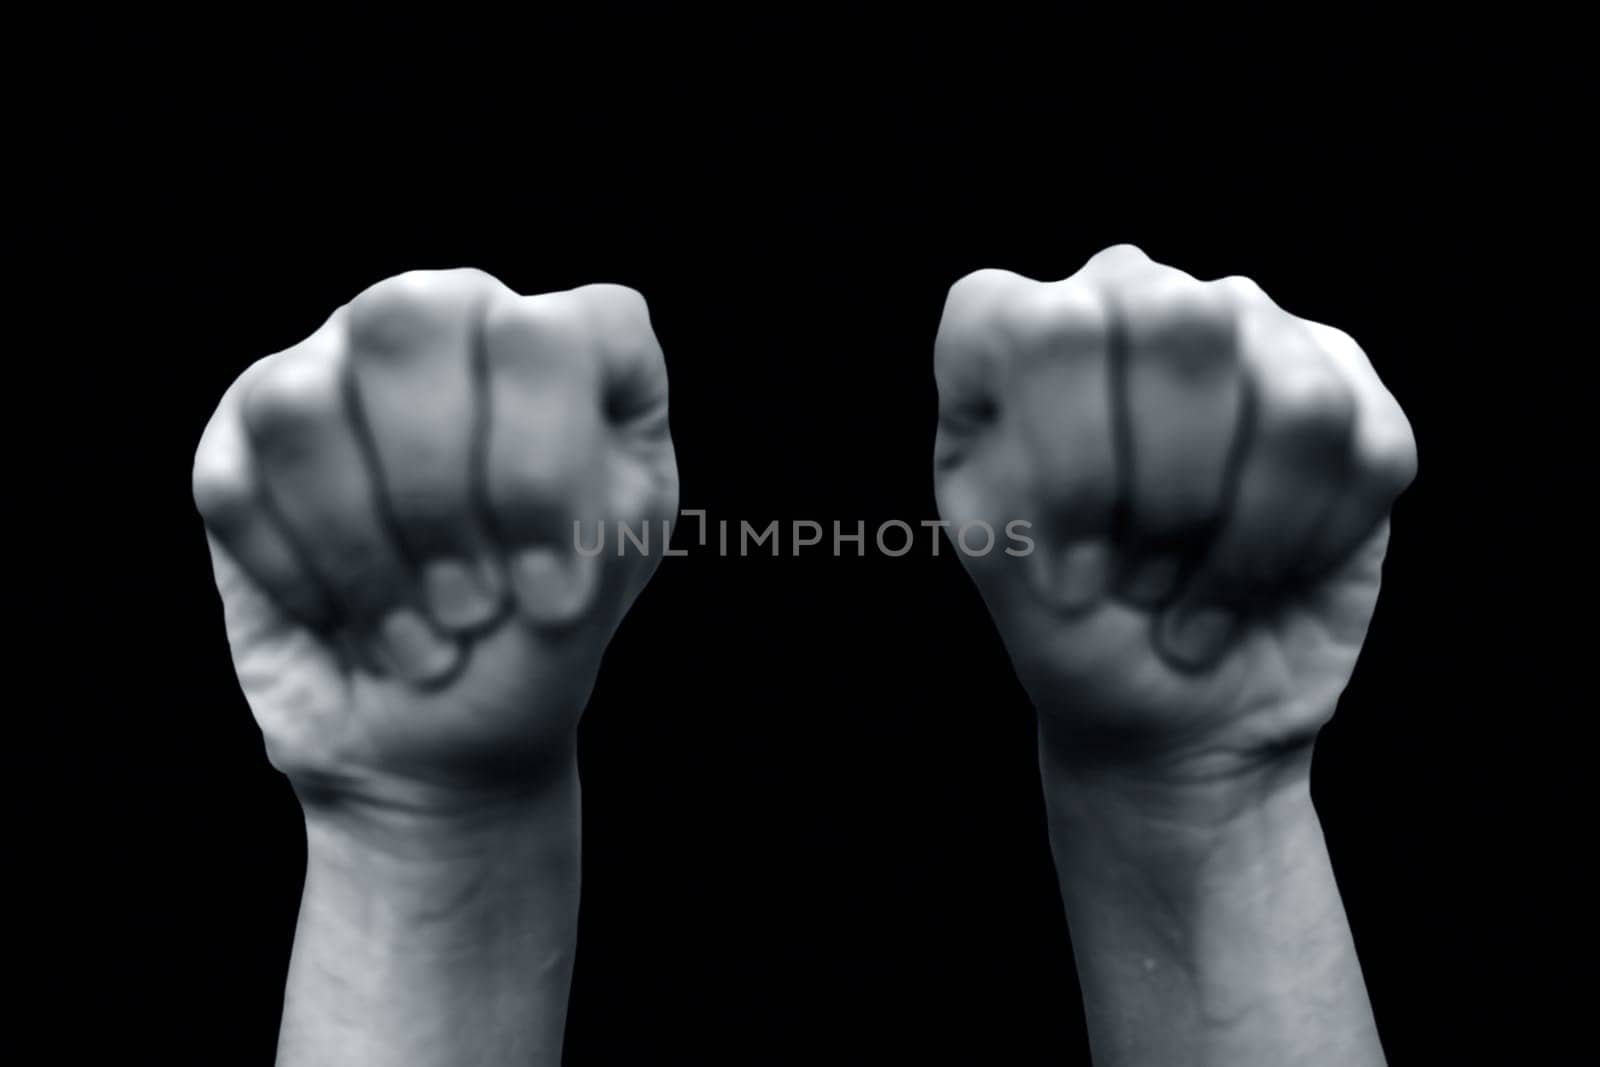 Mushti Yoga Mudra is demonstrated by a single male hand isolated against a black background.